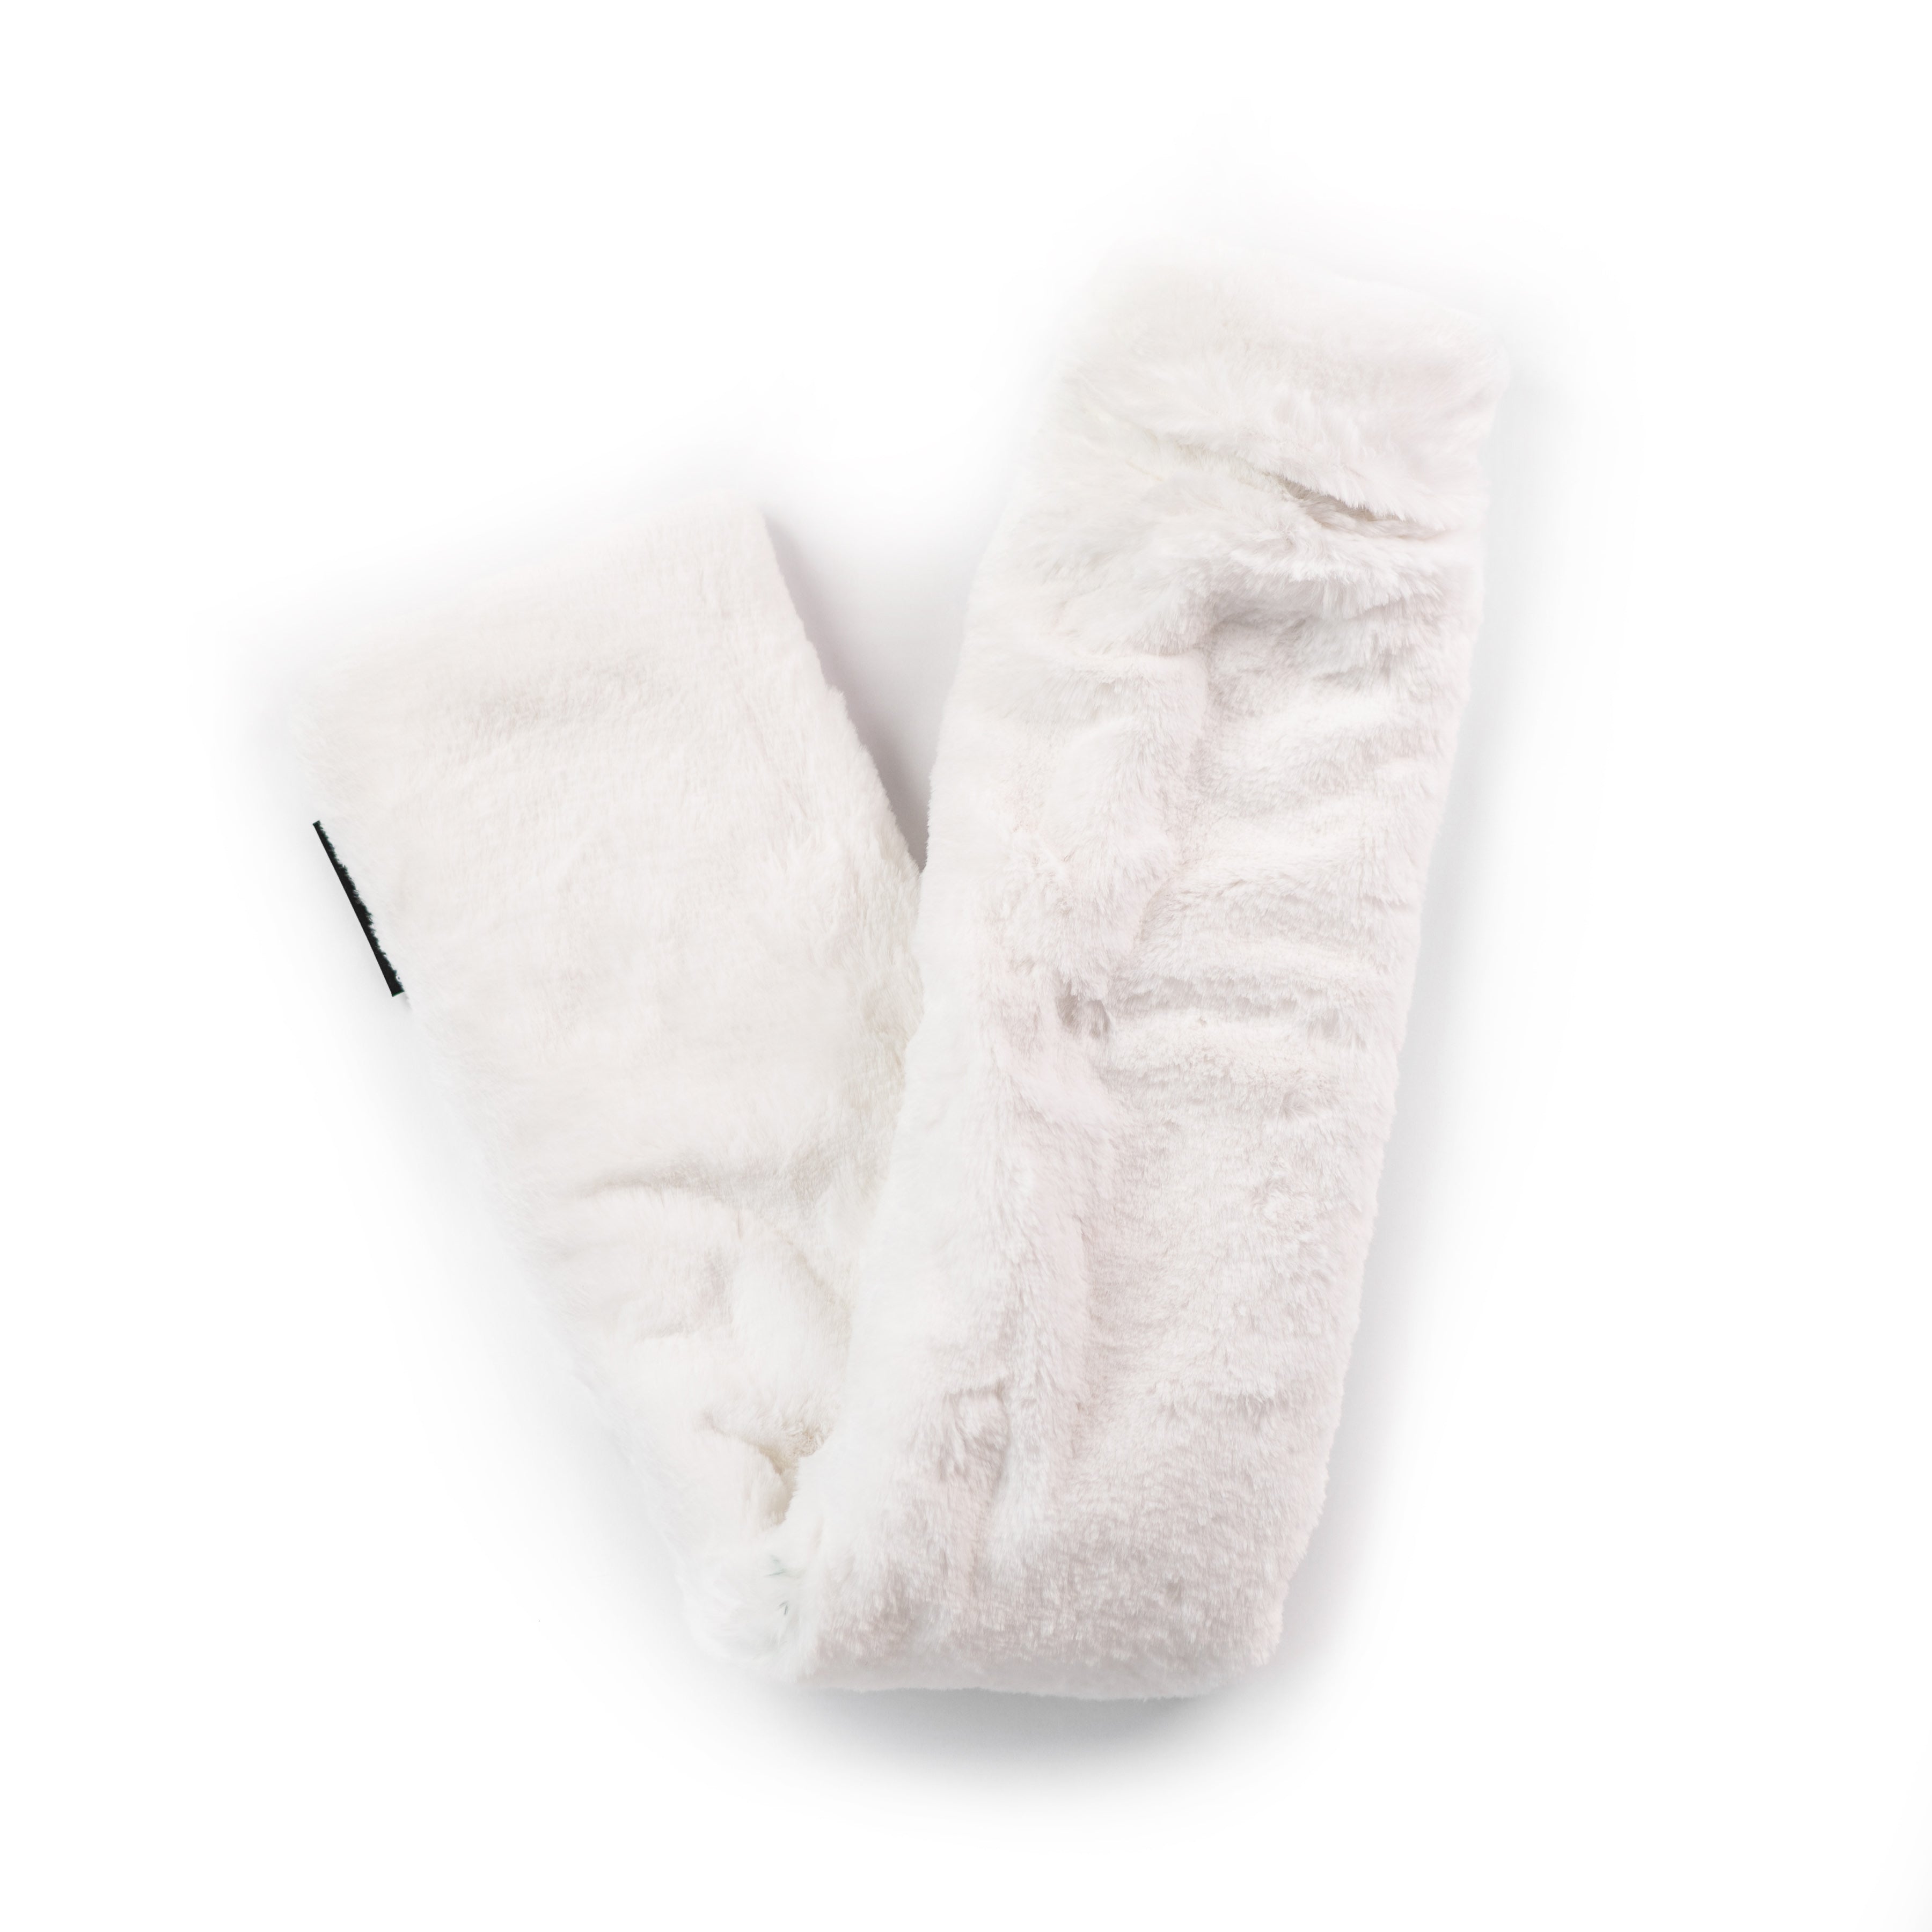 Long Silky Soft White Faux Fur Cover and 2 Litre Natural Rubber Hot Water Bottle